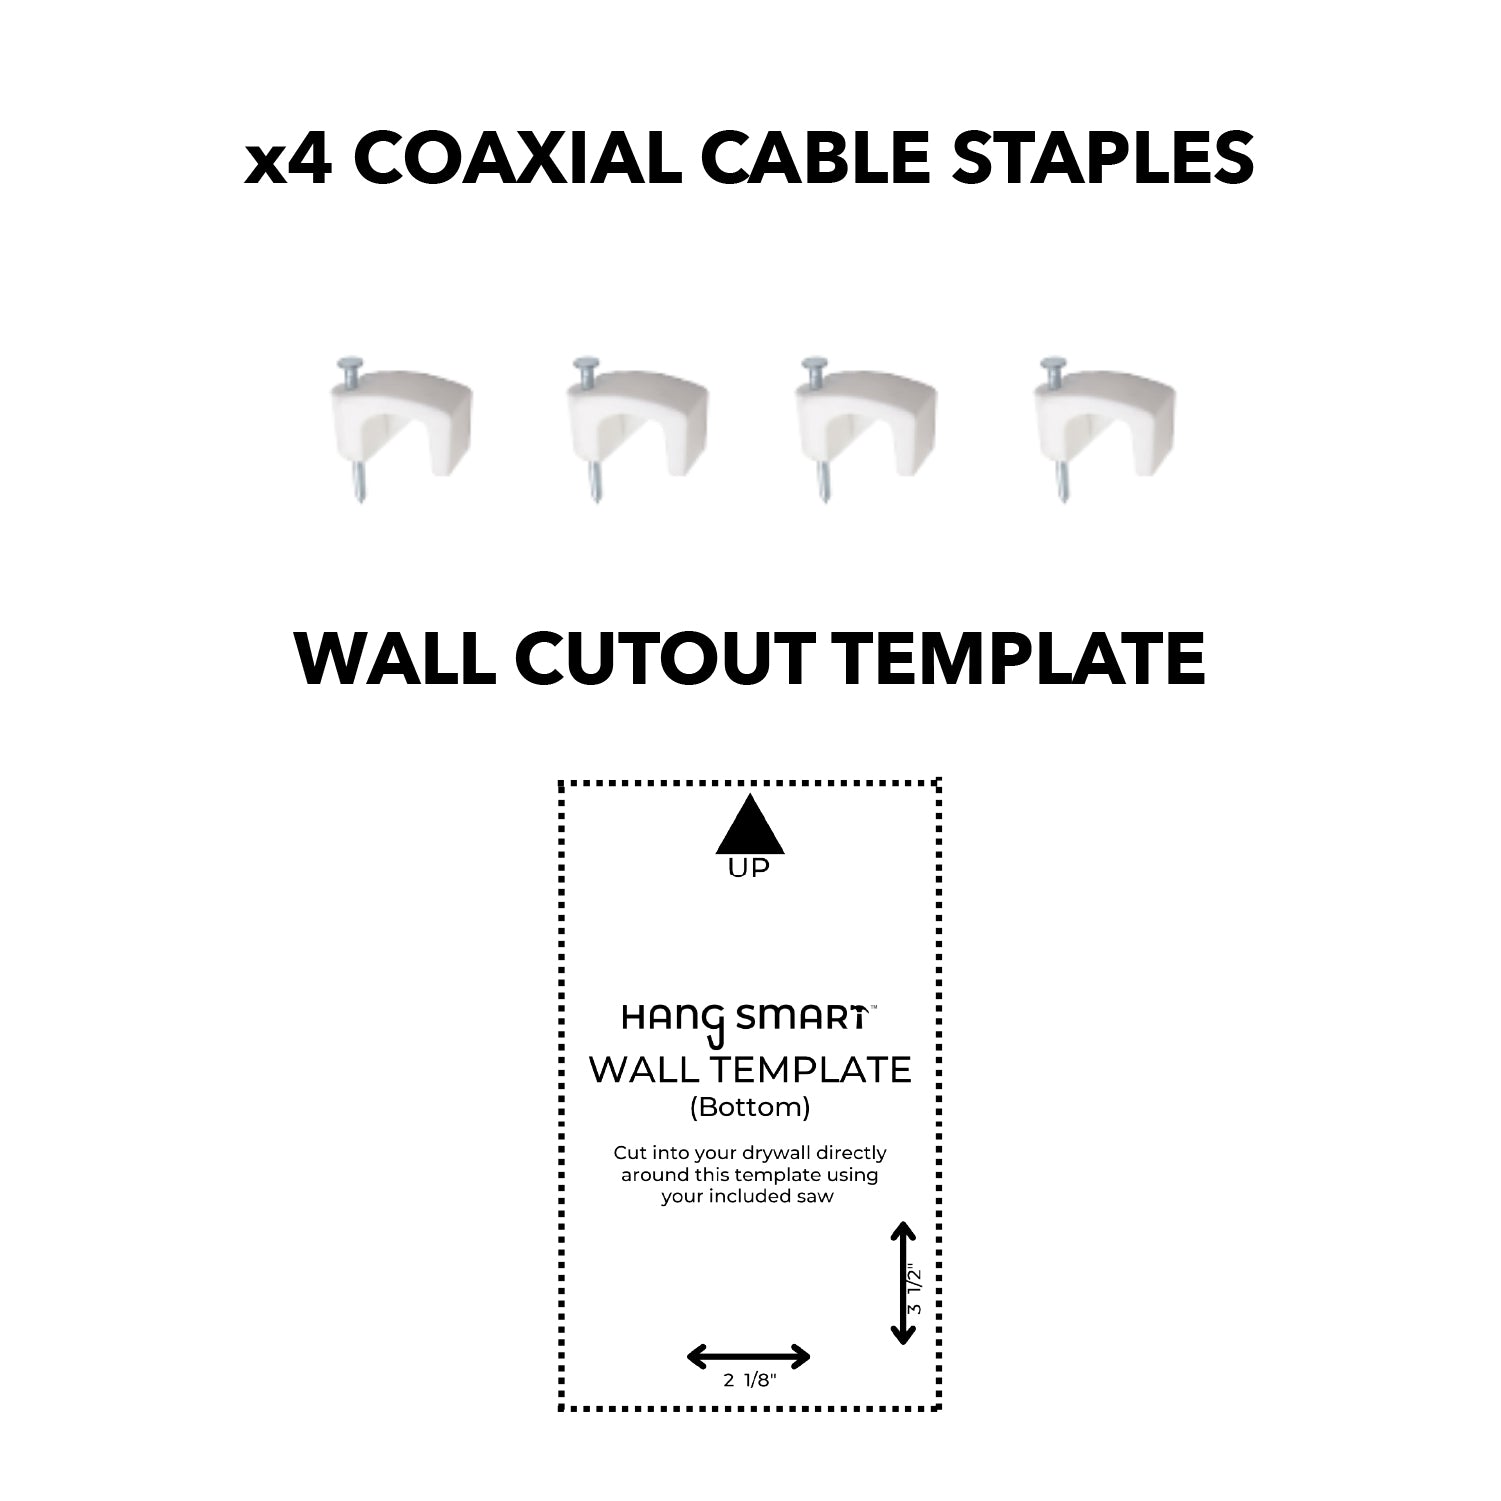 drywall cutout template image